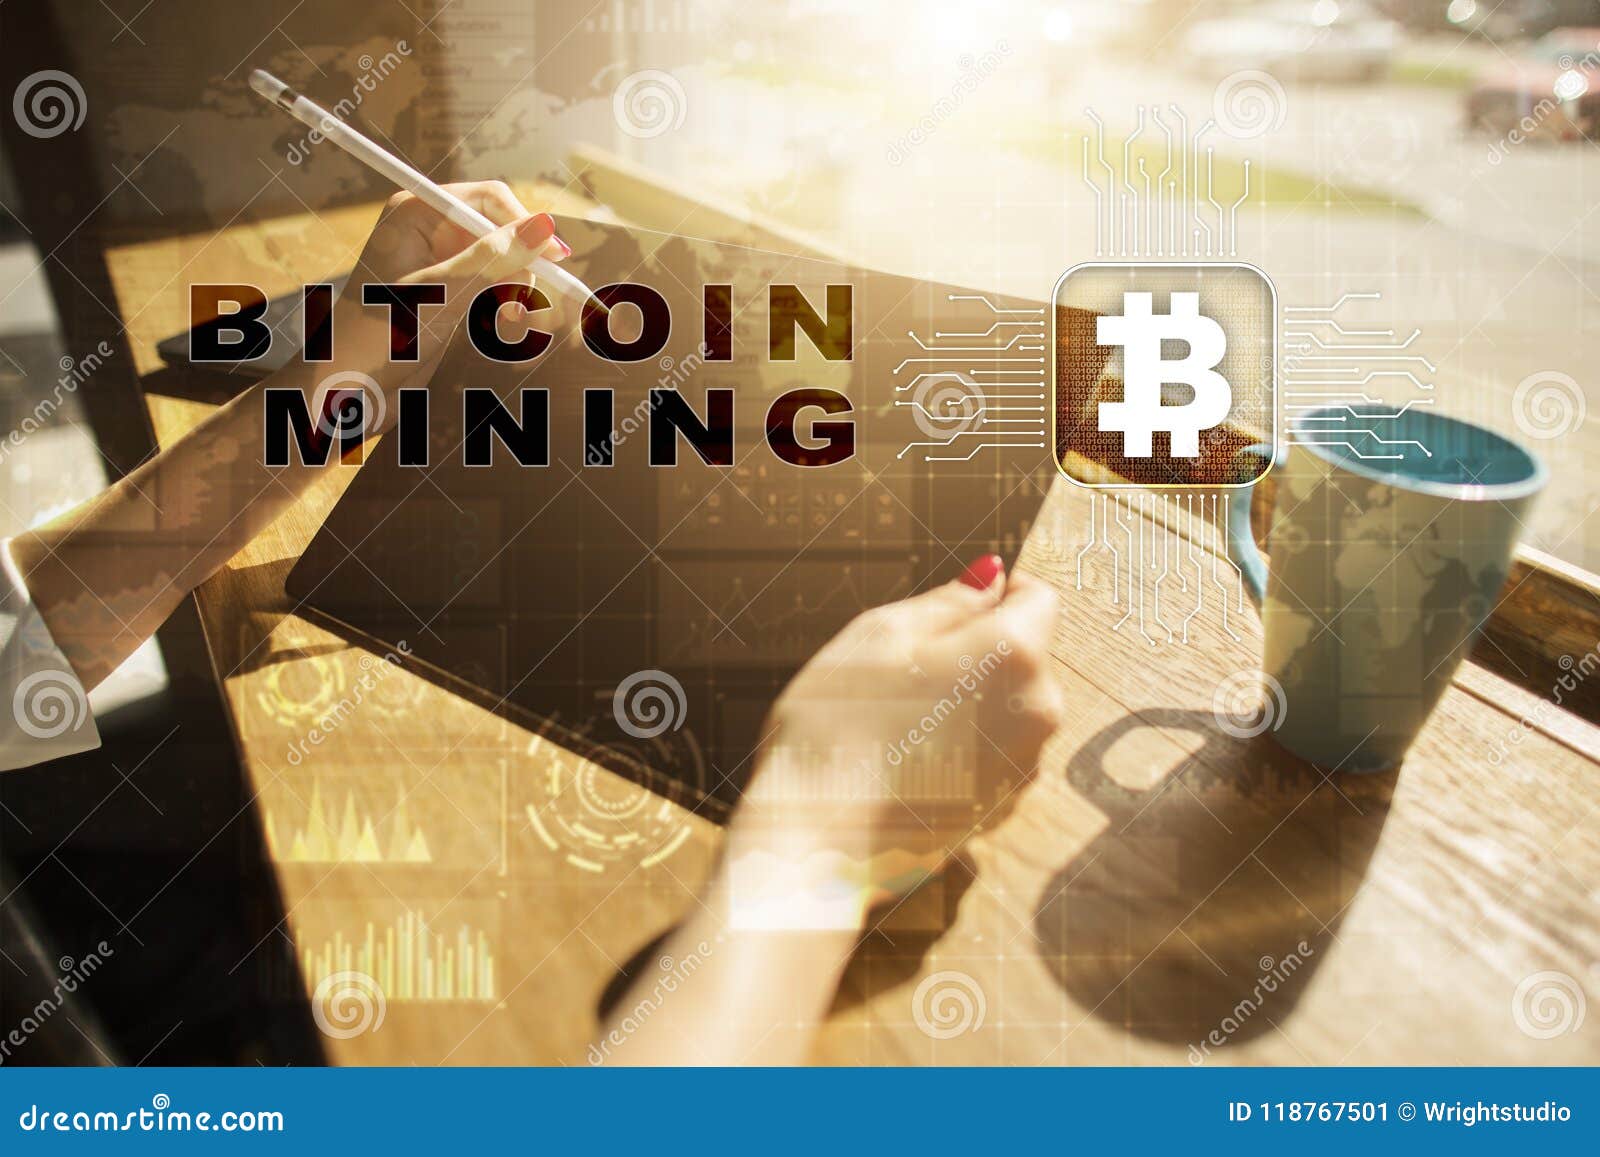 bitcoin and money laundering mining for an effective solution